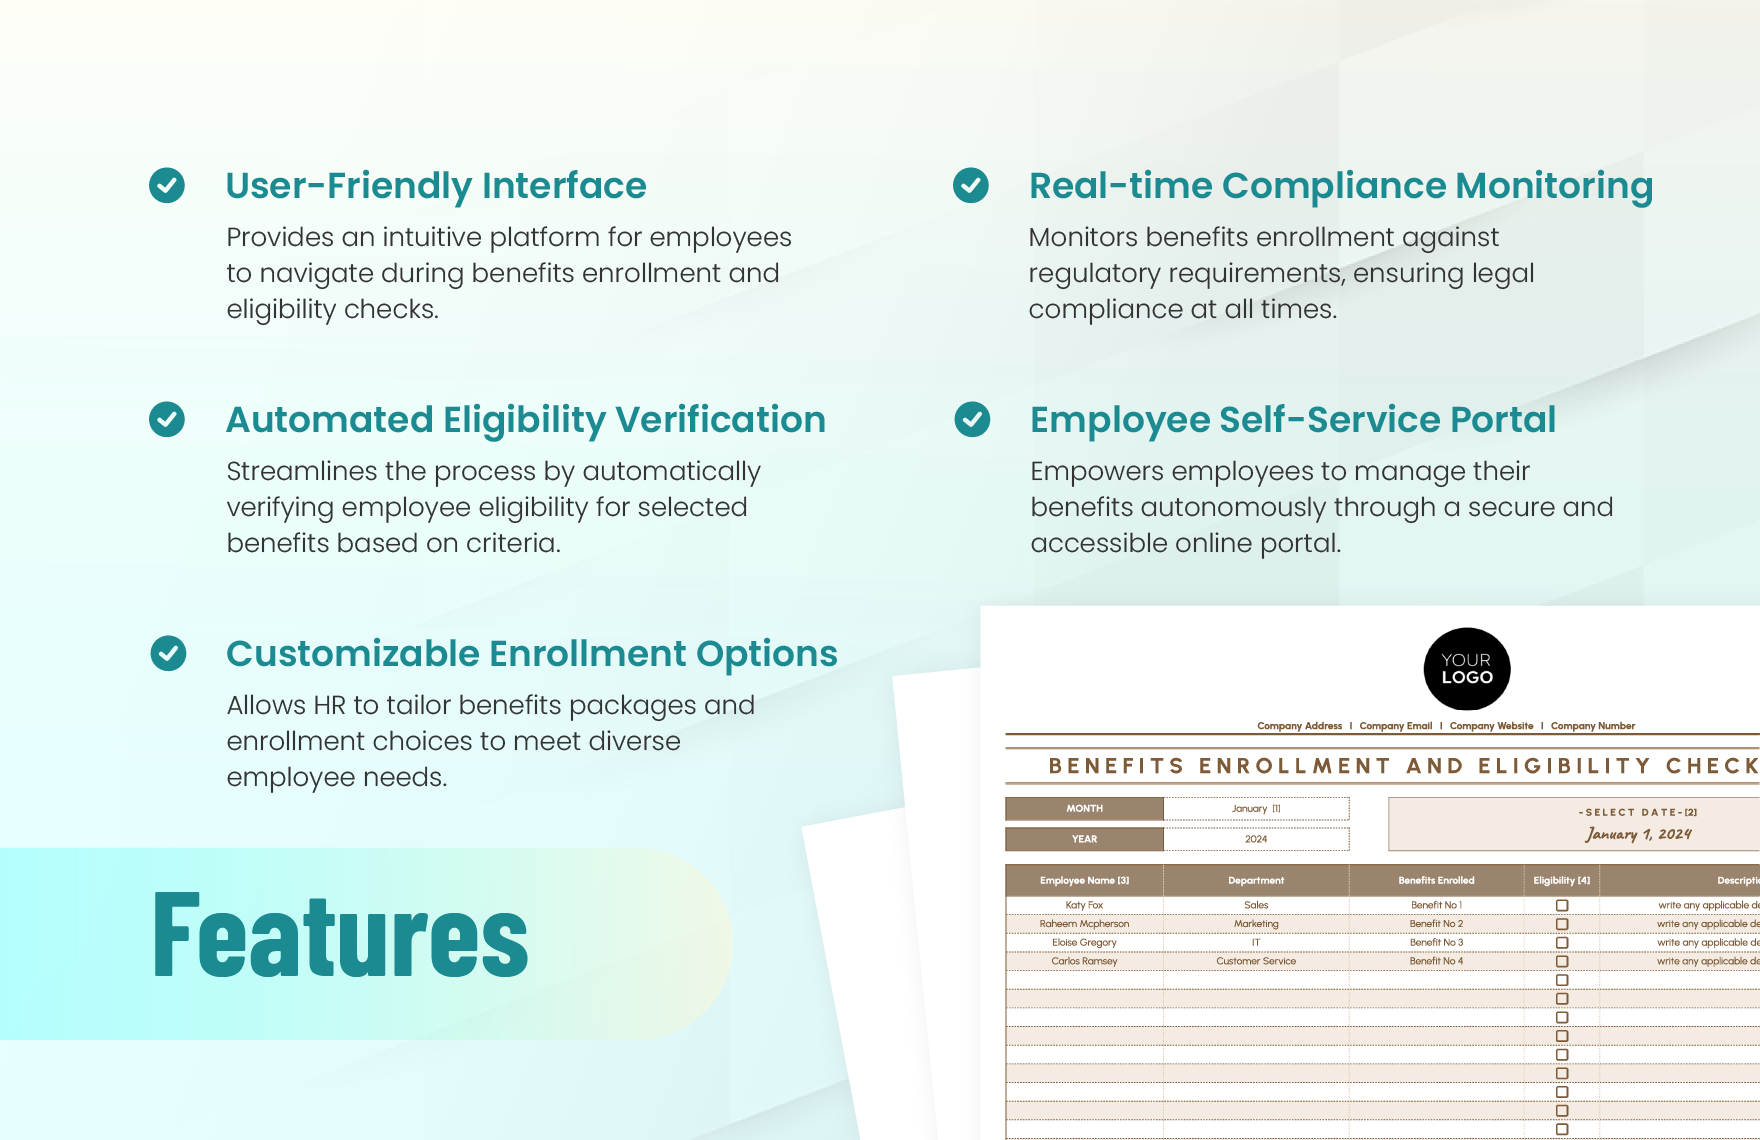 Benefits Enrollment and Eligibility Checker HR Template